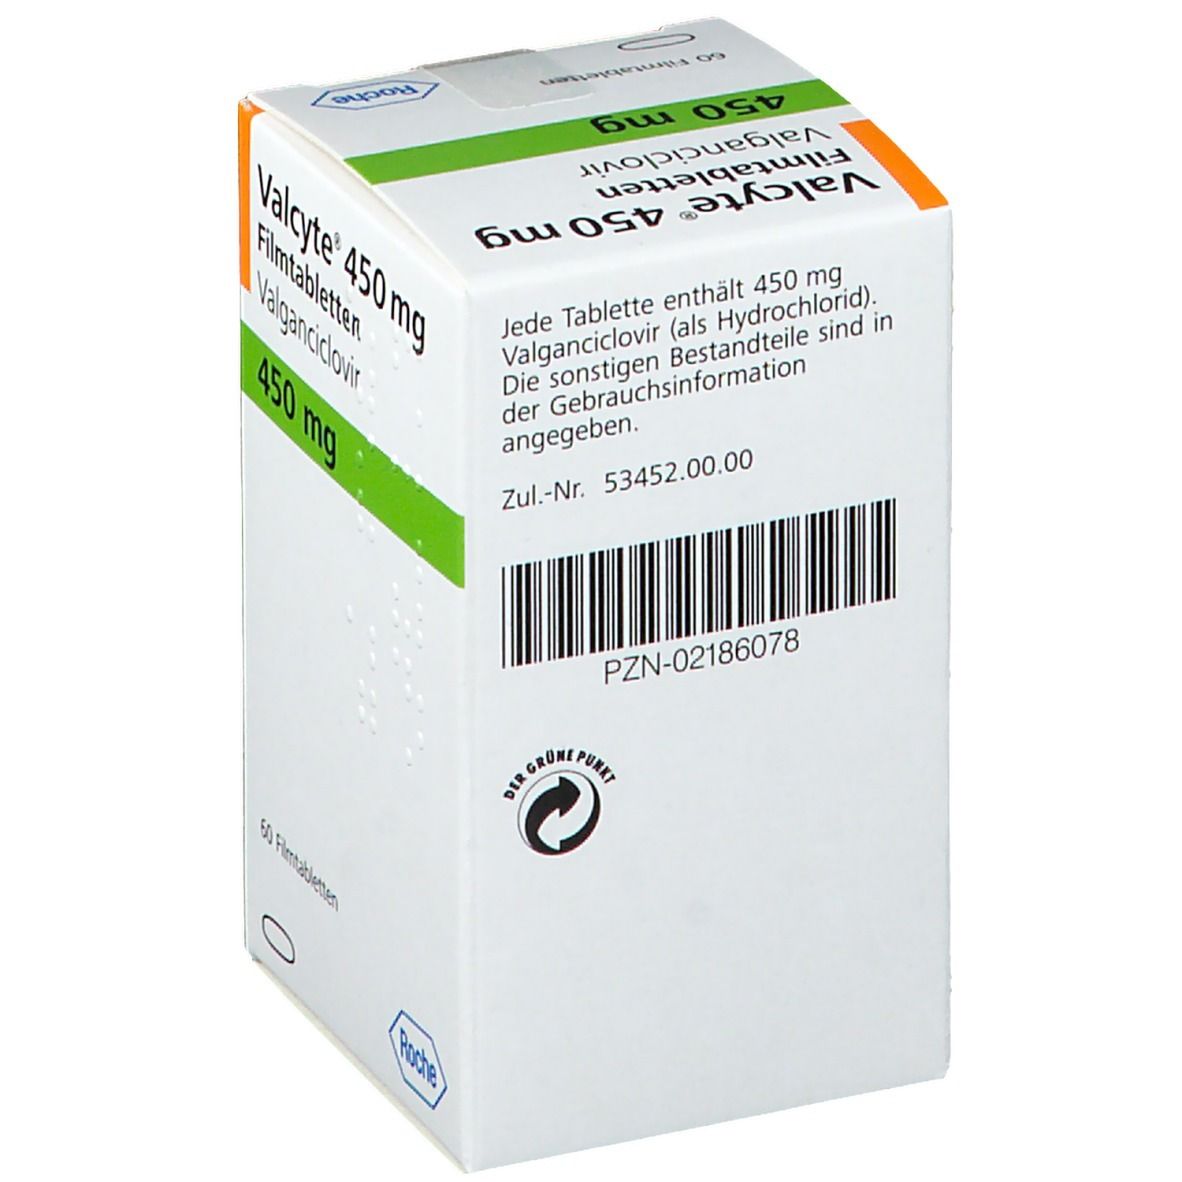 Valcyte® 450 mg